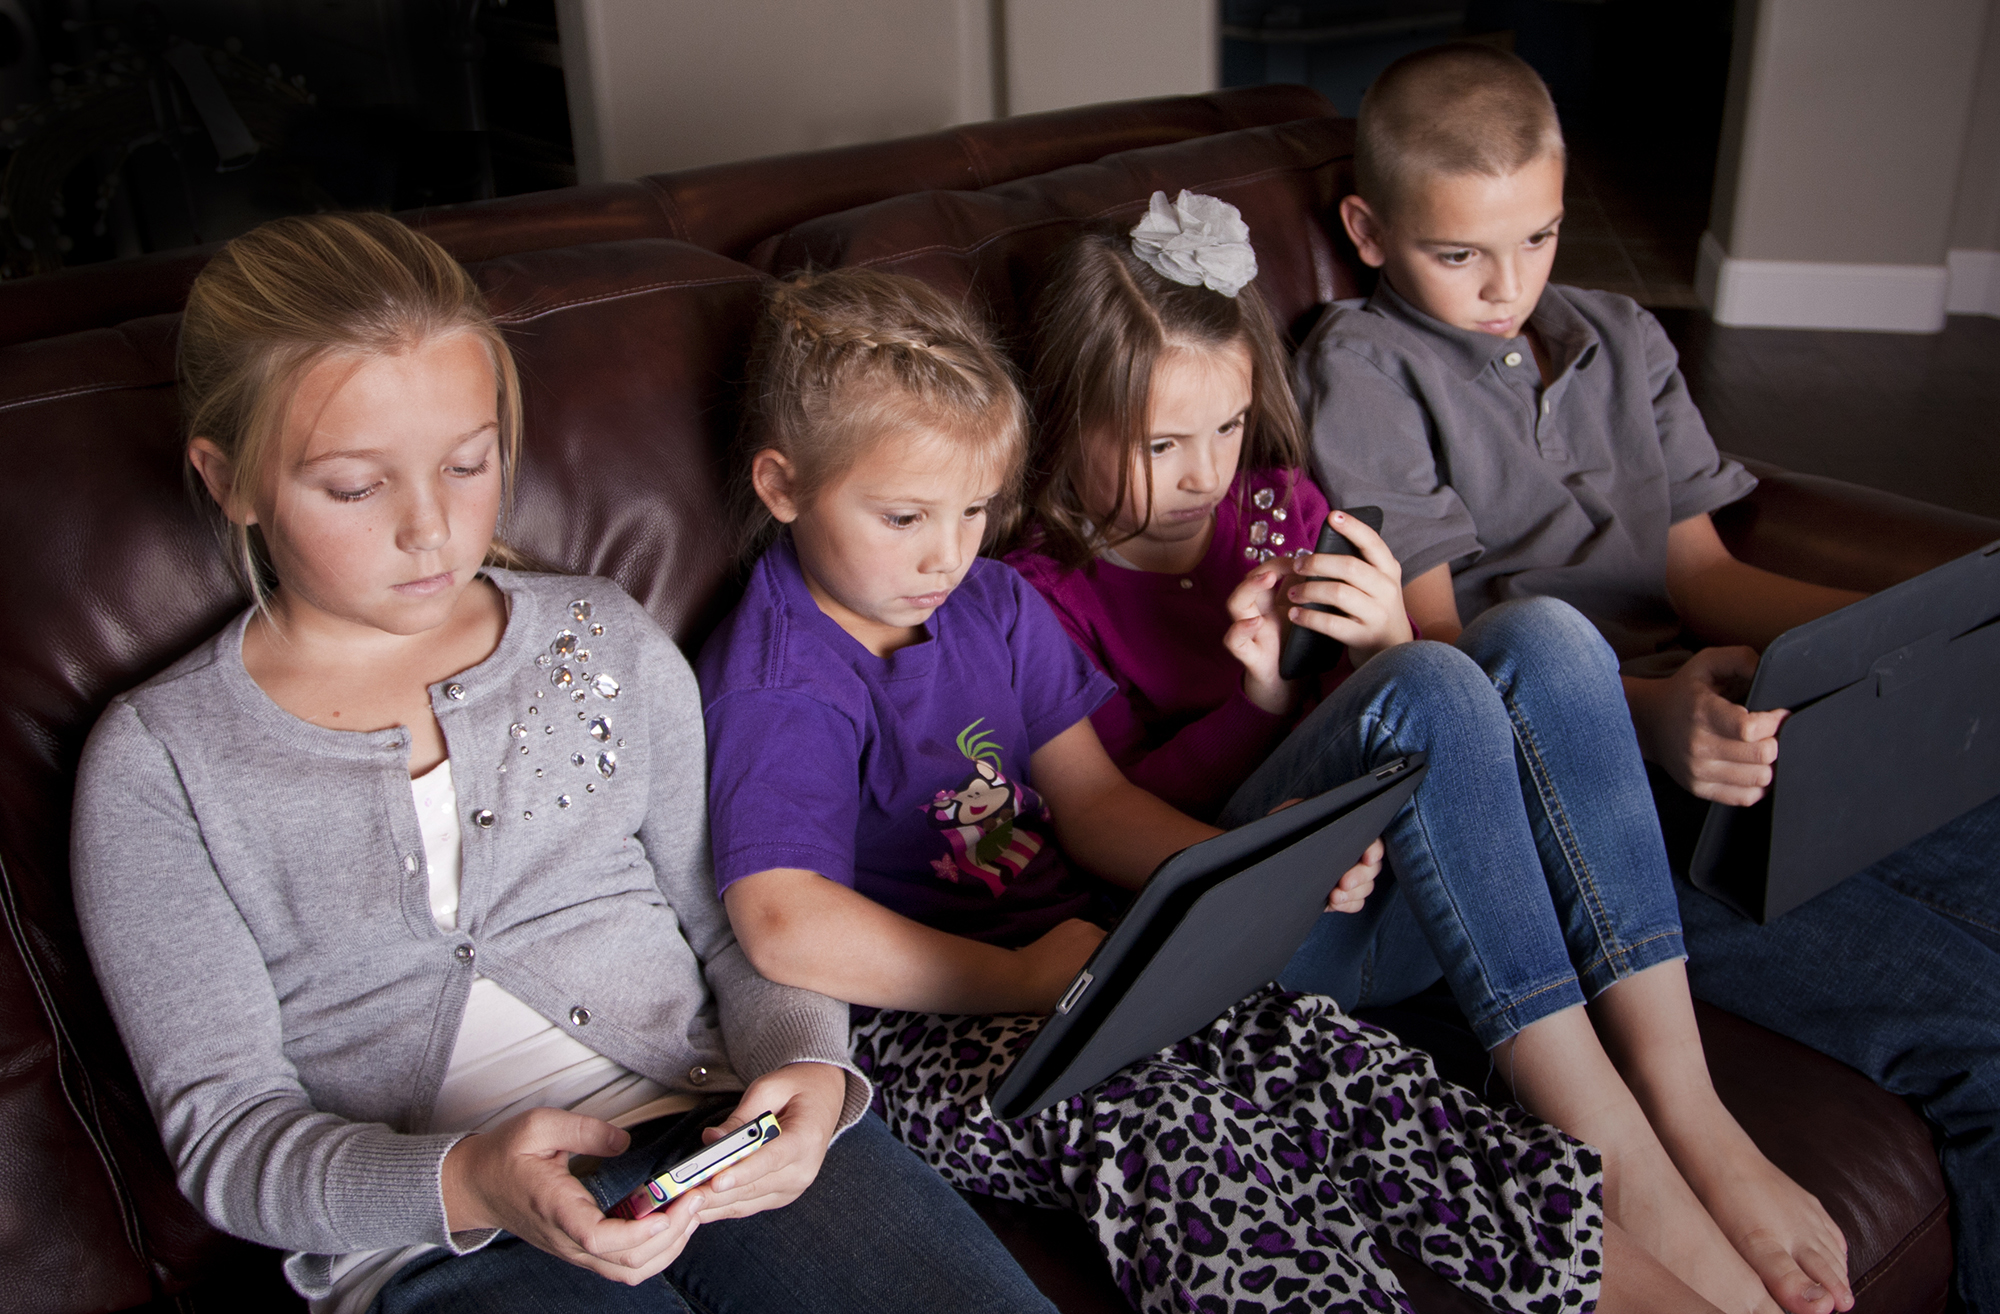 Kids using screen devices